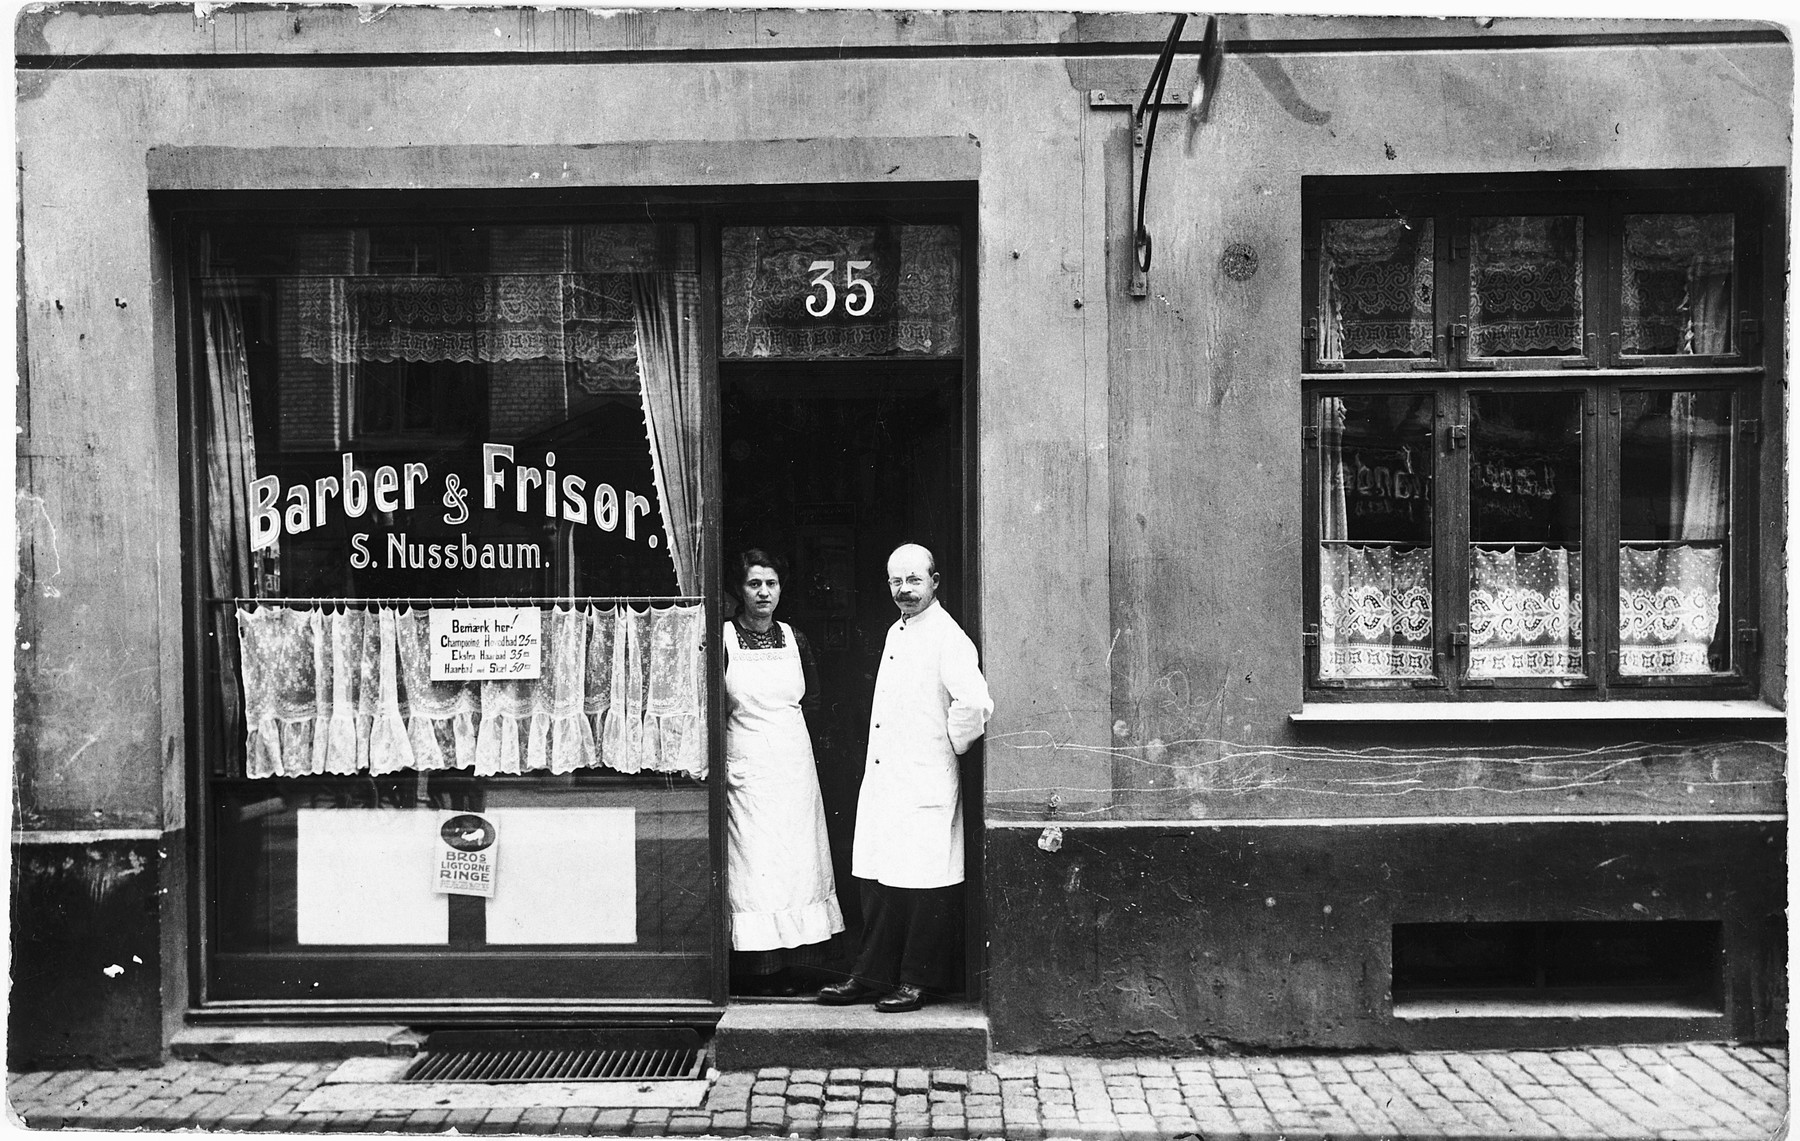 A Jewish couple poses in the doorway of their new barbershop located on the Ochenschlagergade in Copenhagen.

Pictured are Saul and Chane Nussbaum, who live in the same building.